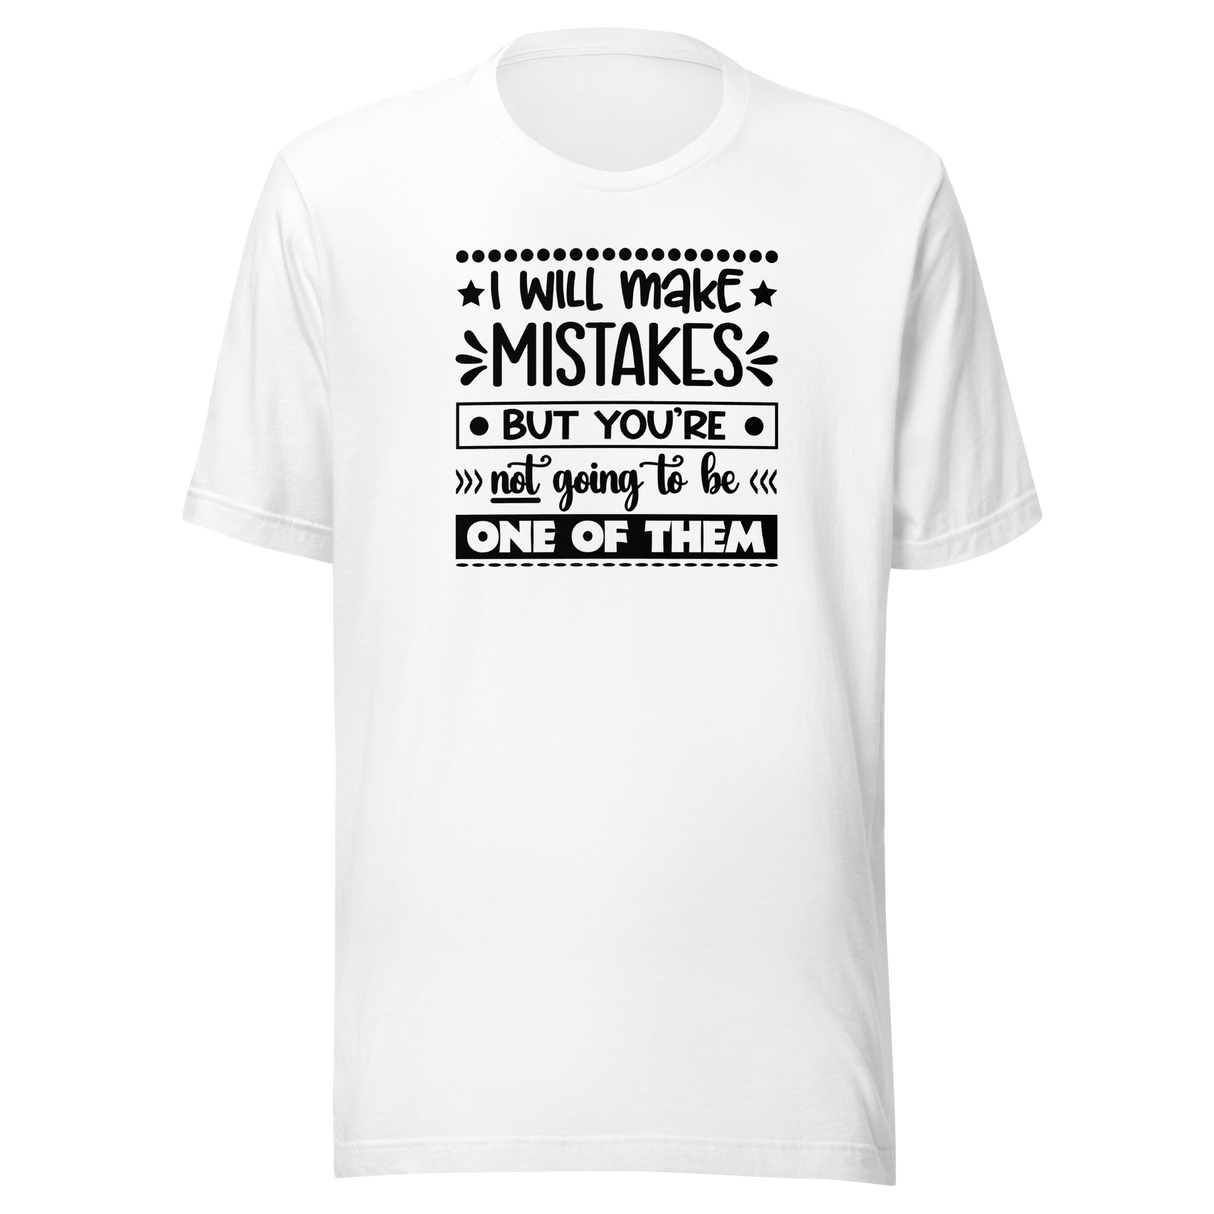 i-will-make-mistakes-but-youre-not-going-to-be-one-of-them-life-tee-funny-t-shirt-inspirational-tee-motivational-t-shirt-positive-tee#color_white